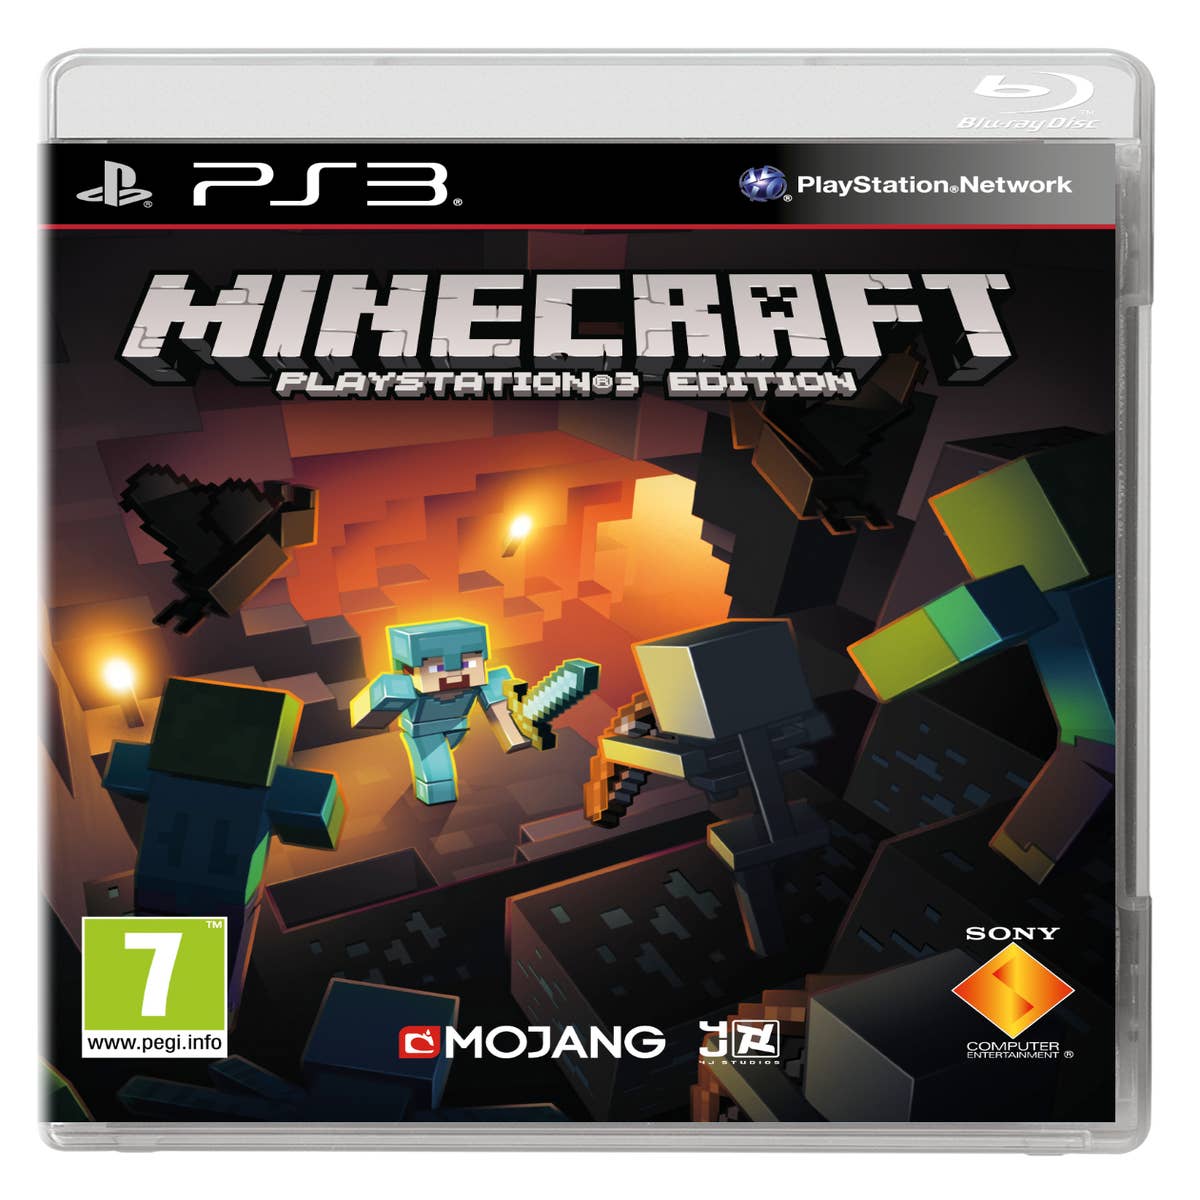 PS4 Minecraft PlayStation Edition Game Disc Editorial Stock Photo